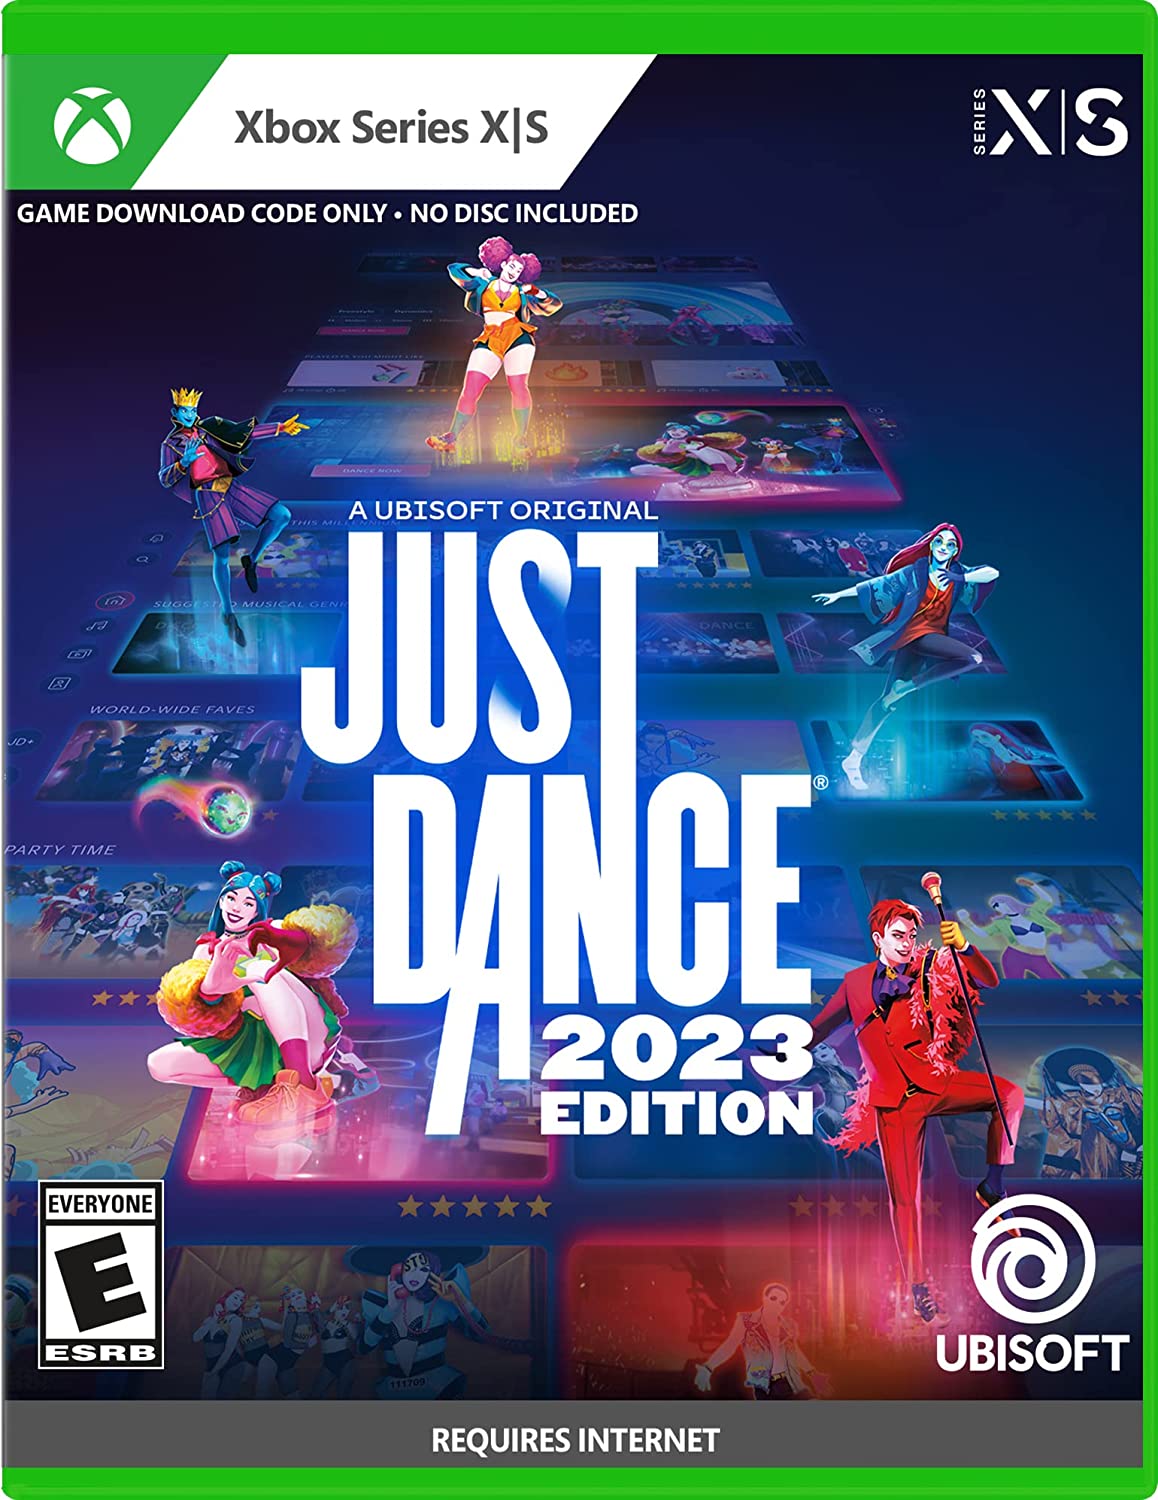 Just Dance 2023 Edition Code In a Box Digital Download (Xbox Series S|X) $17.40 + Free Shipping w/ Prime or on $25+